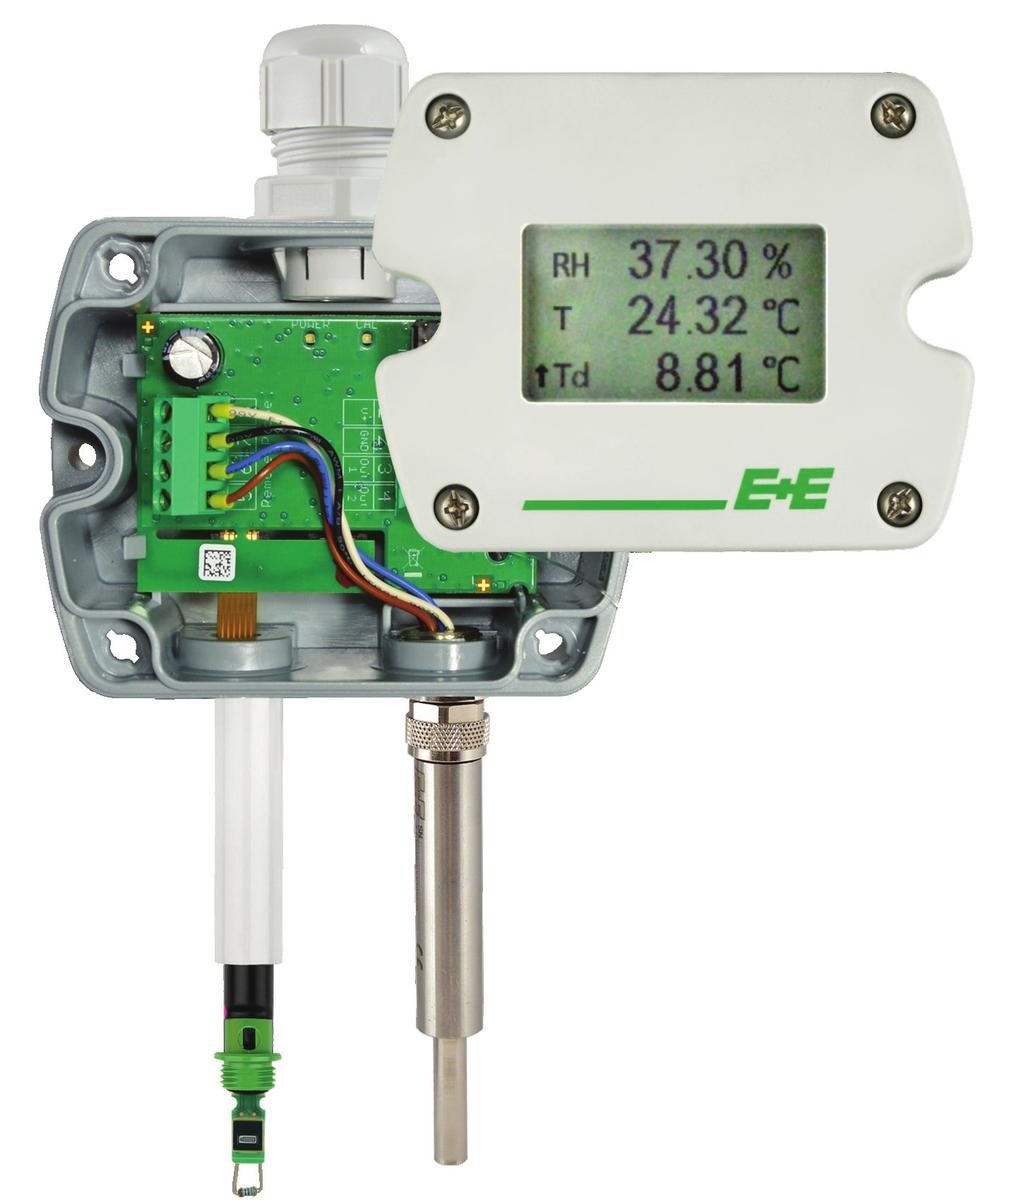 Excellent performance of even in polluted, aggressive environment is ensured by the combination of completely encapsulated measurement electronics inside the humidity probe and the long-term stable